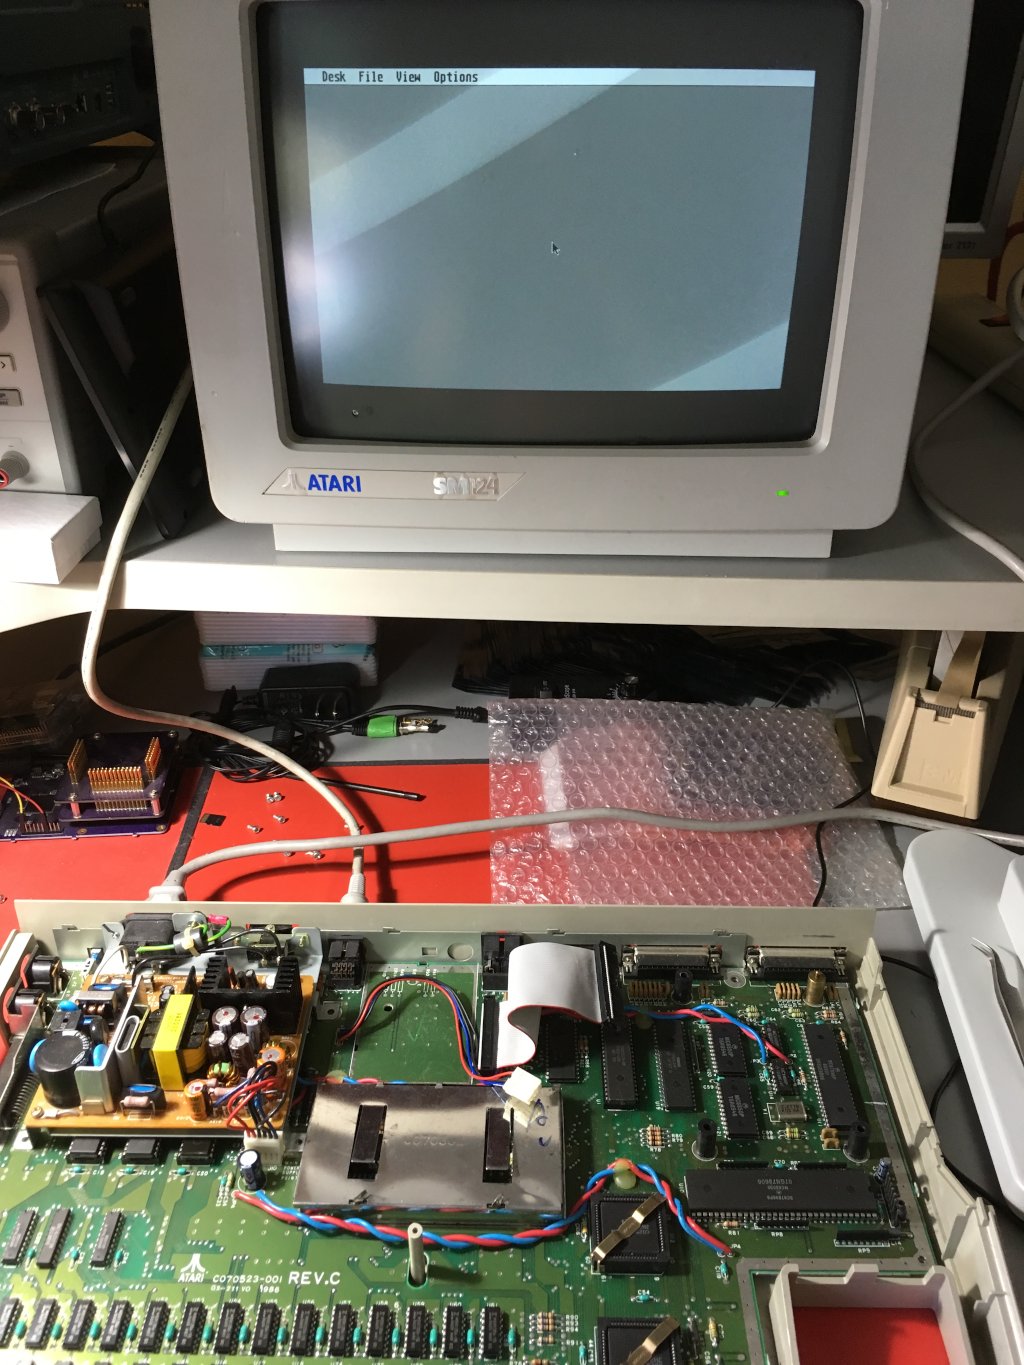 Atari ST 1040STF with case open, running, with desktop on monochrome CRT monitor